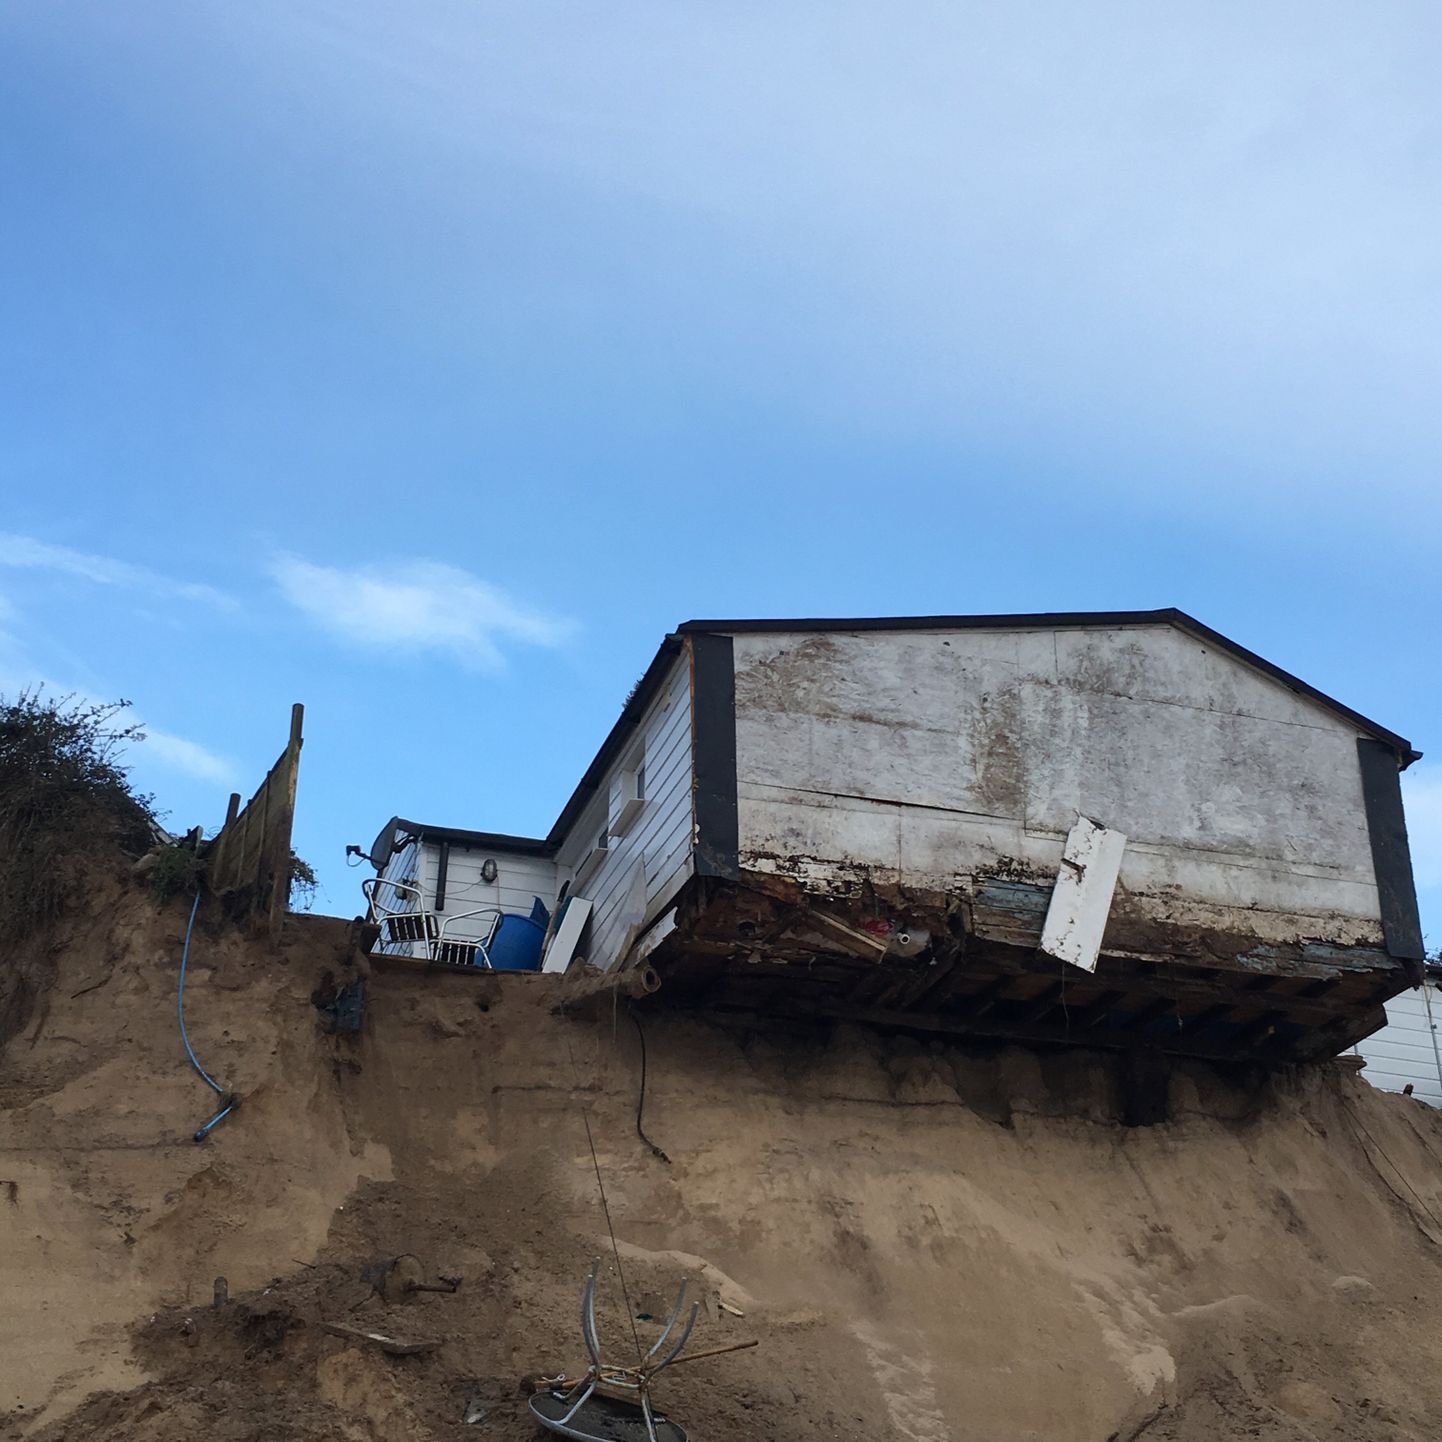 Lance Martin's property in Hemsby, Norfolk just after the storms that ruined the other houses on the cliff edge. Lance's home was the only one to survive the Beast from the East storms on a crumbling cliff but has been told to stop carrying out work to protect his home. See SWNS Cambridge copy SWCAcliff:A resident whose cliff-top property was the only one to survive the Beast from the East storms on a crumbling cliff has been told to stop carrying out work to protect his home. Lance Martin, 60, had been using a mechanical digger to transfer concrete blocks and piling up sand to protect his home ahead of winter.This comes after a number of houses perched on a cliff edge were evacuated and demolished due to the aftermath from the Beast from the East, in March this year.